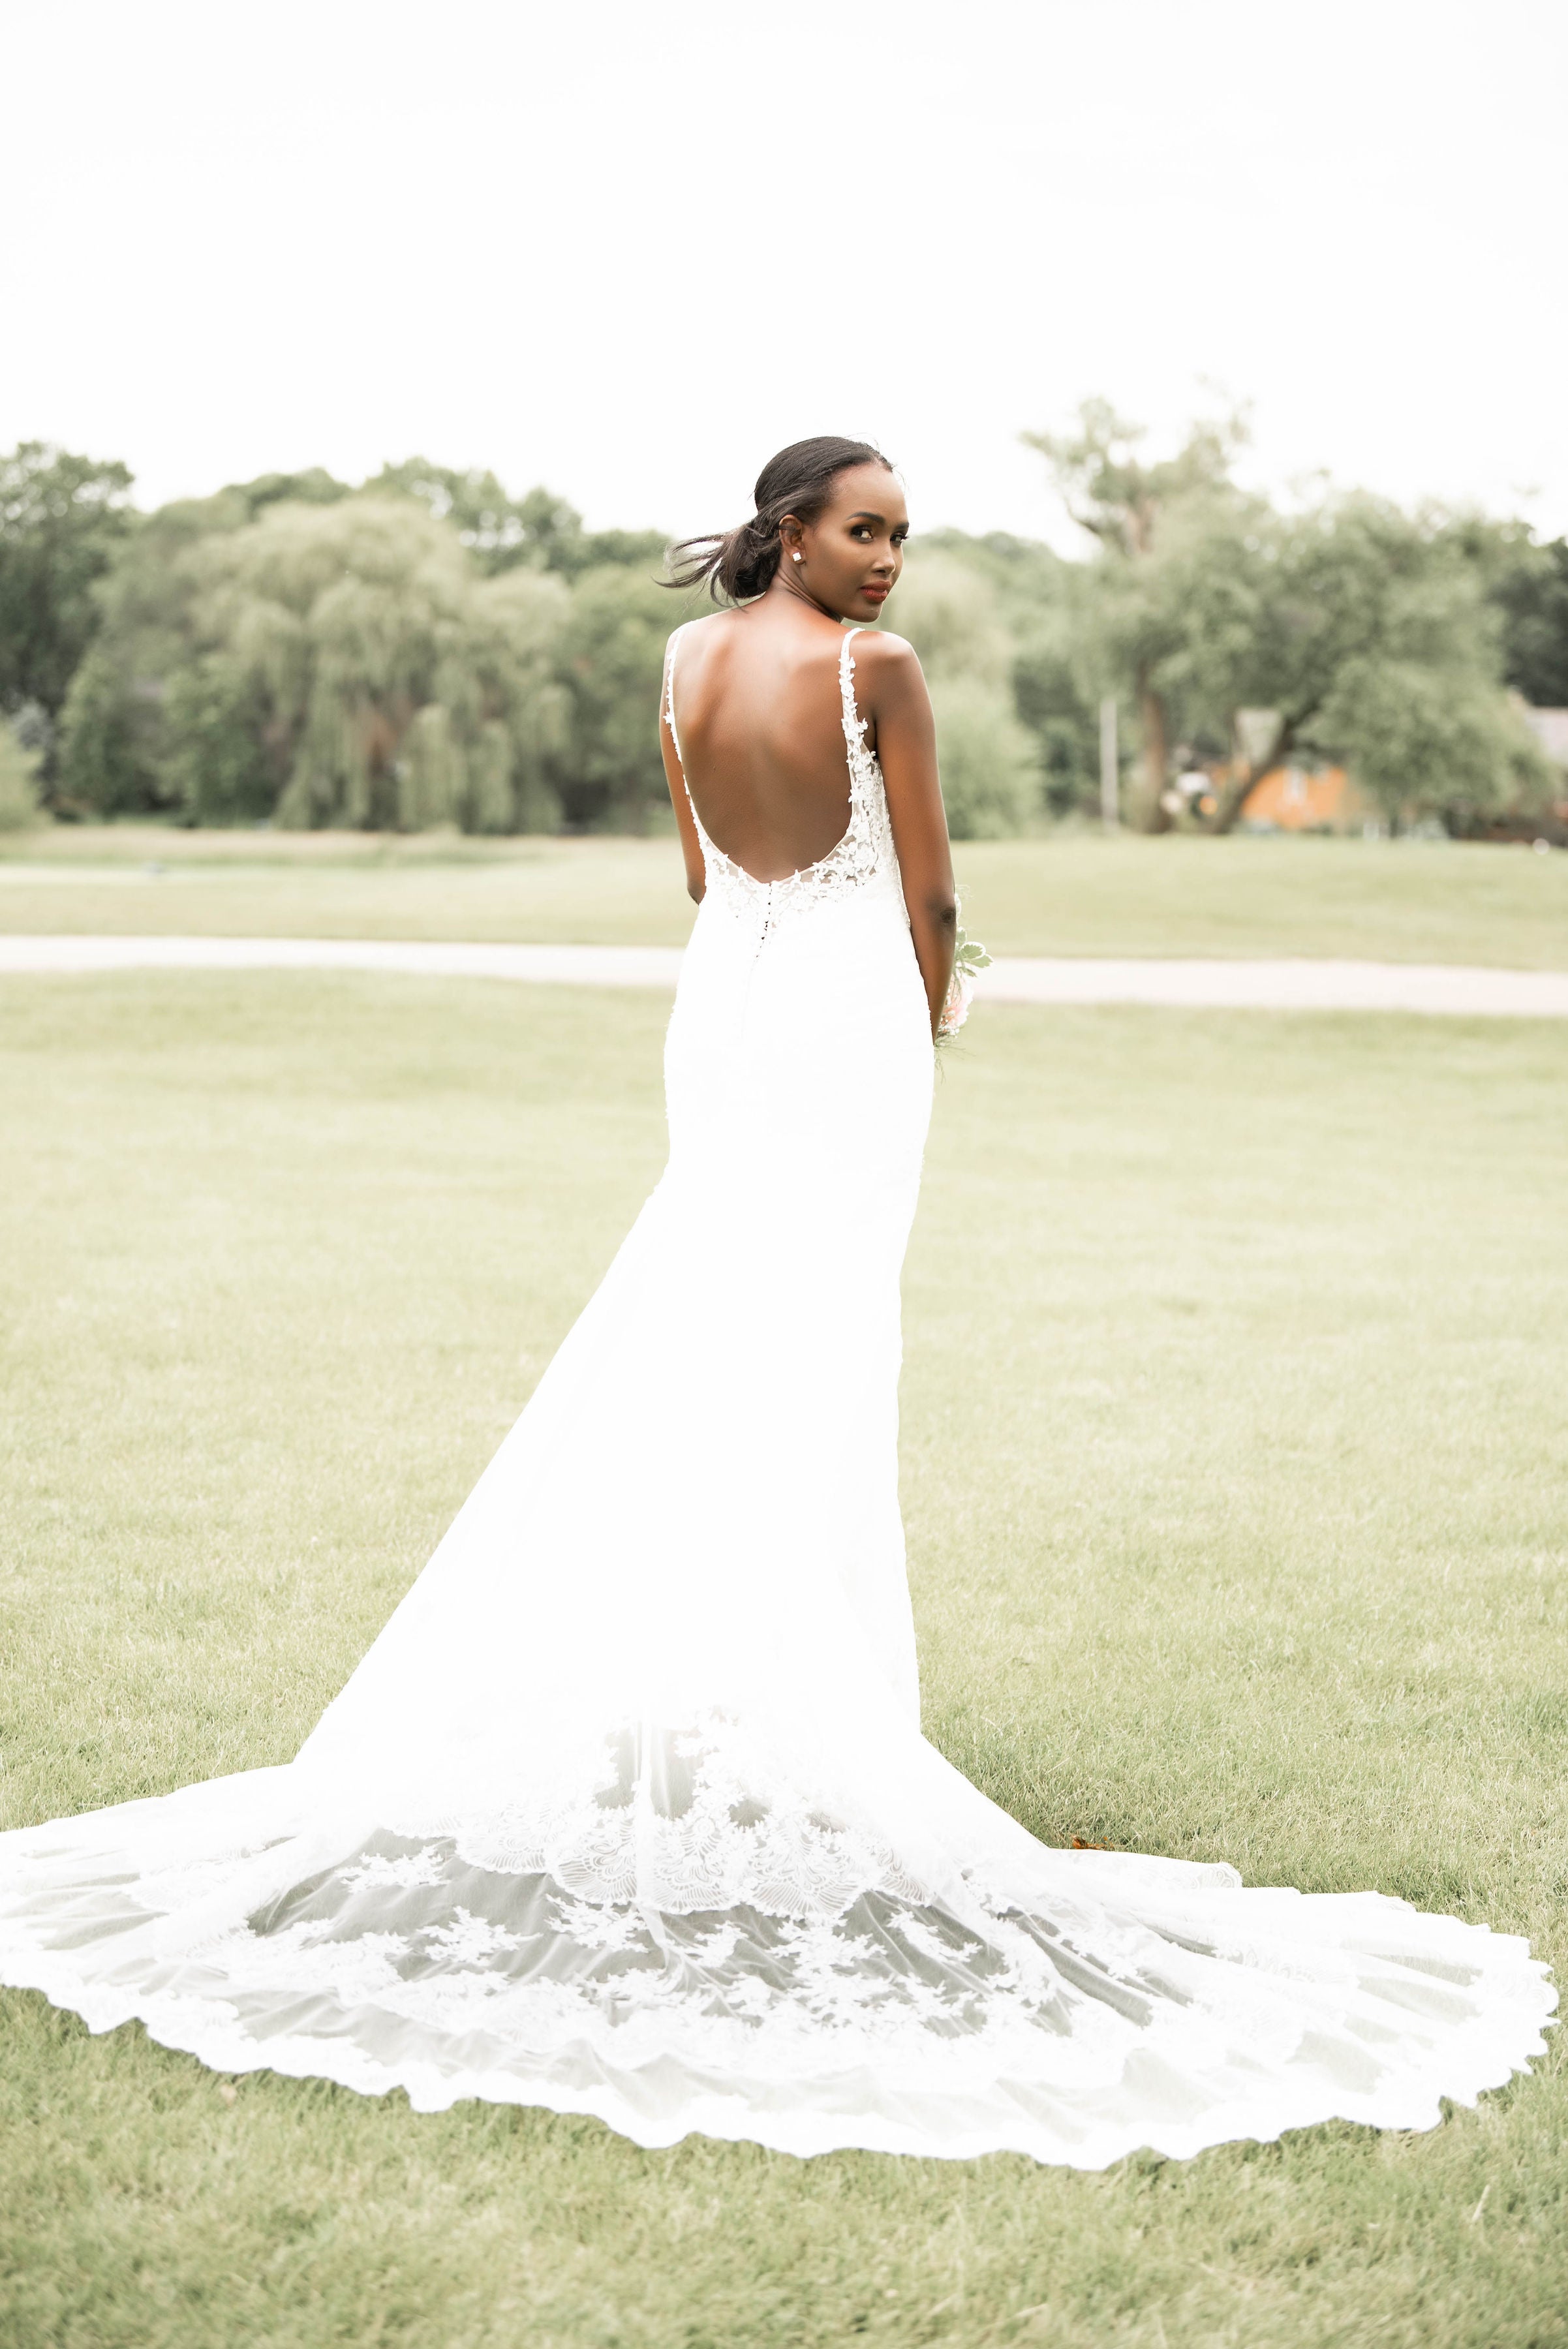 Bridal Bliss: Viviana And Benson’s Modern Wedding With A Cultural Twist